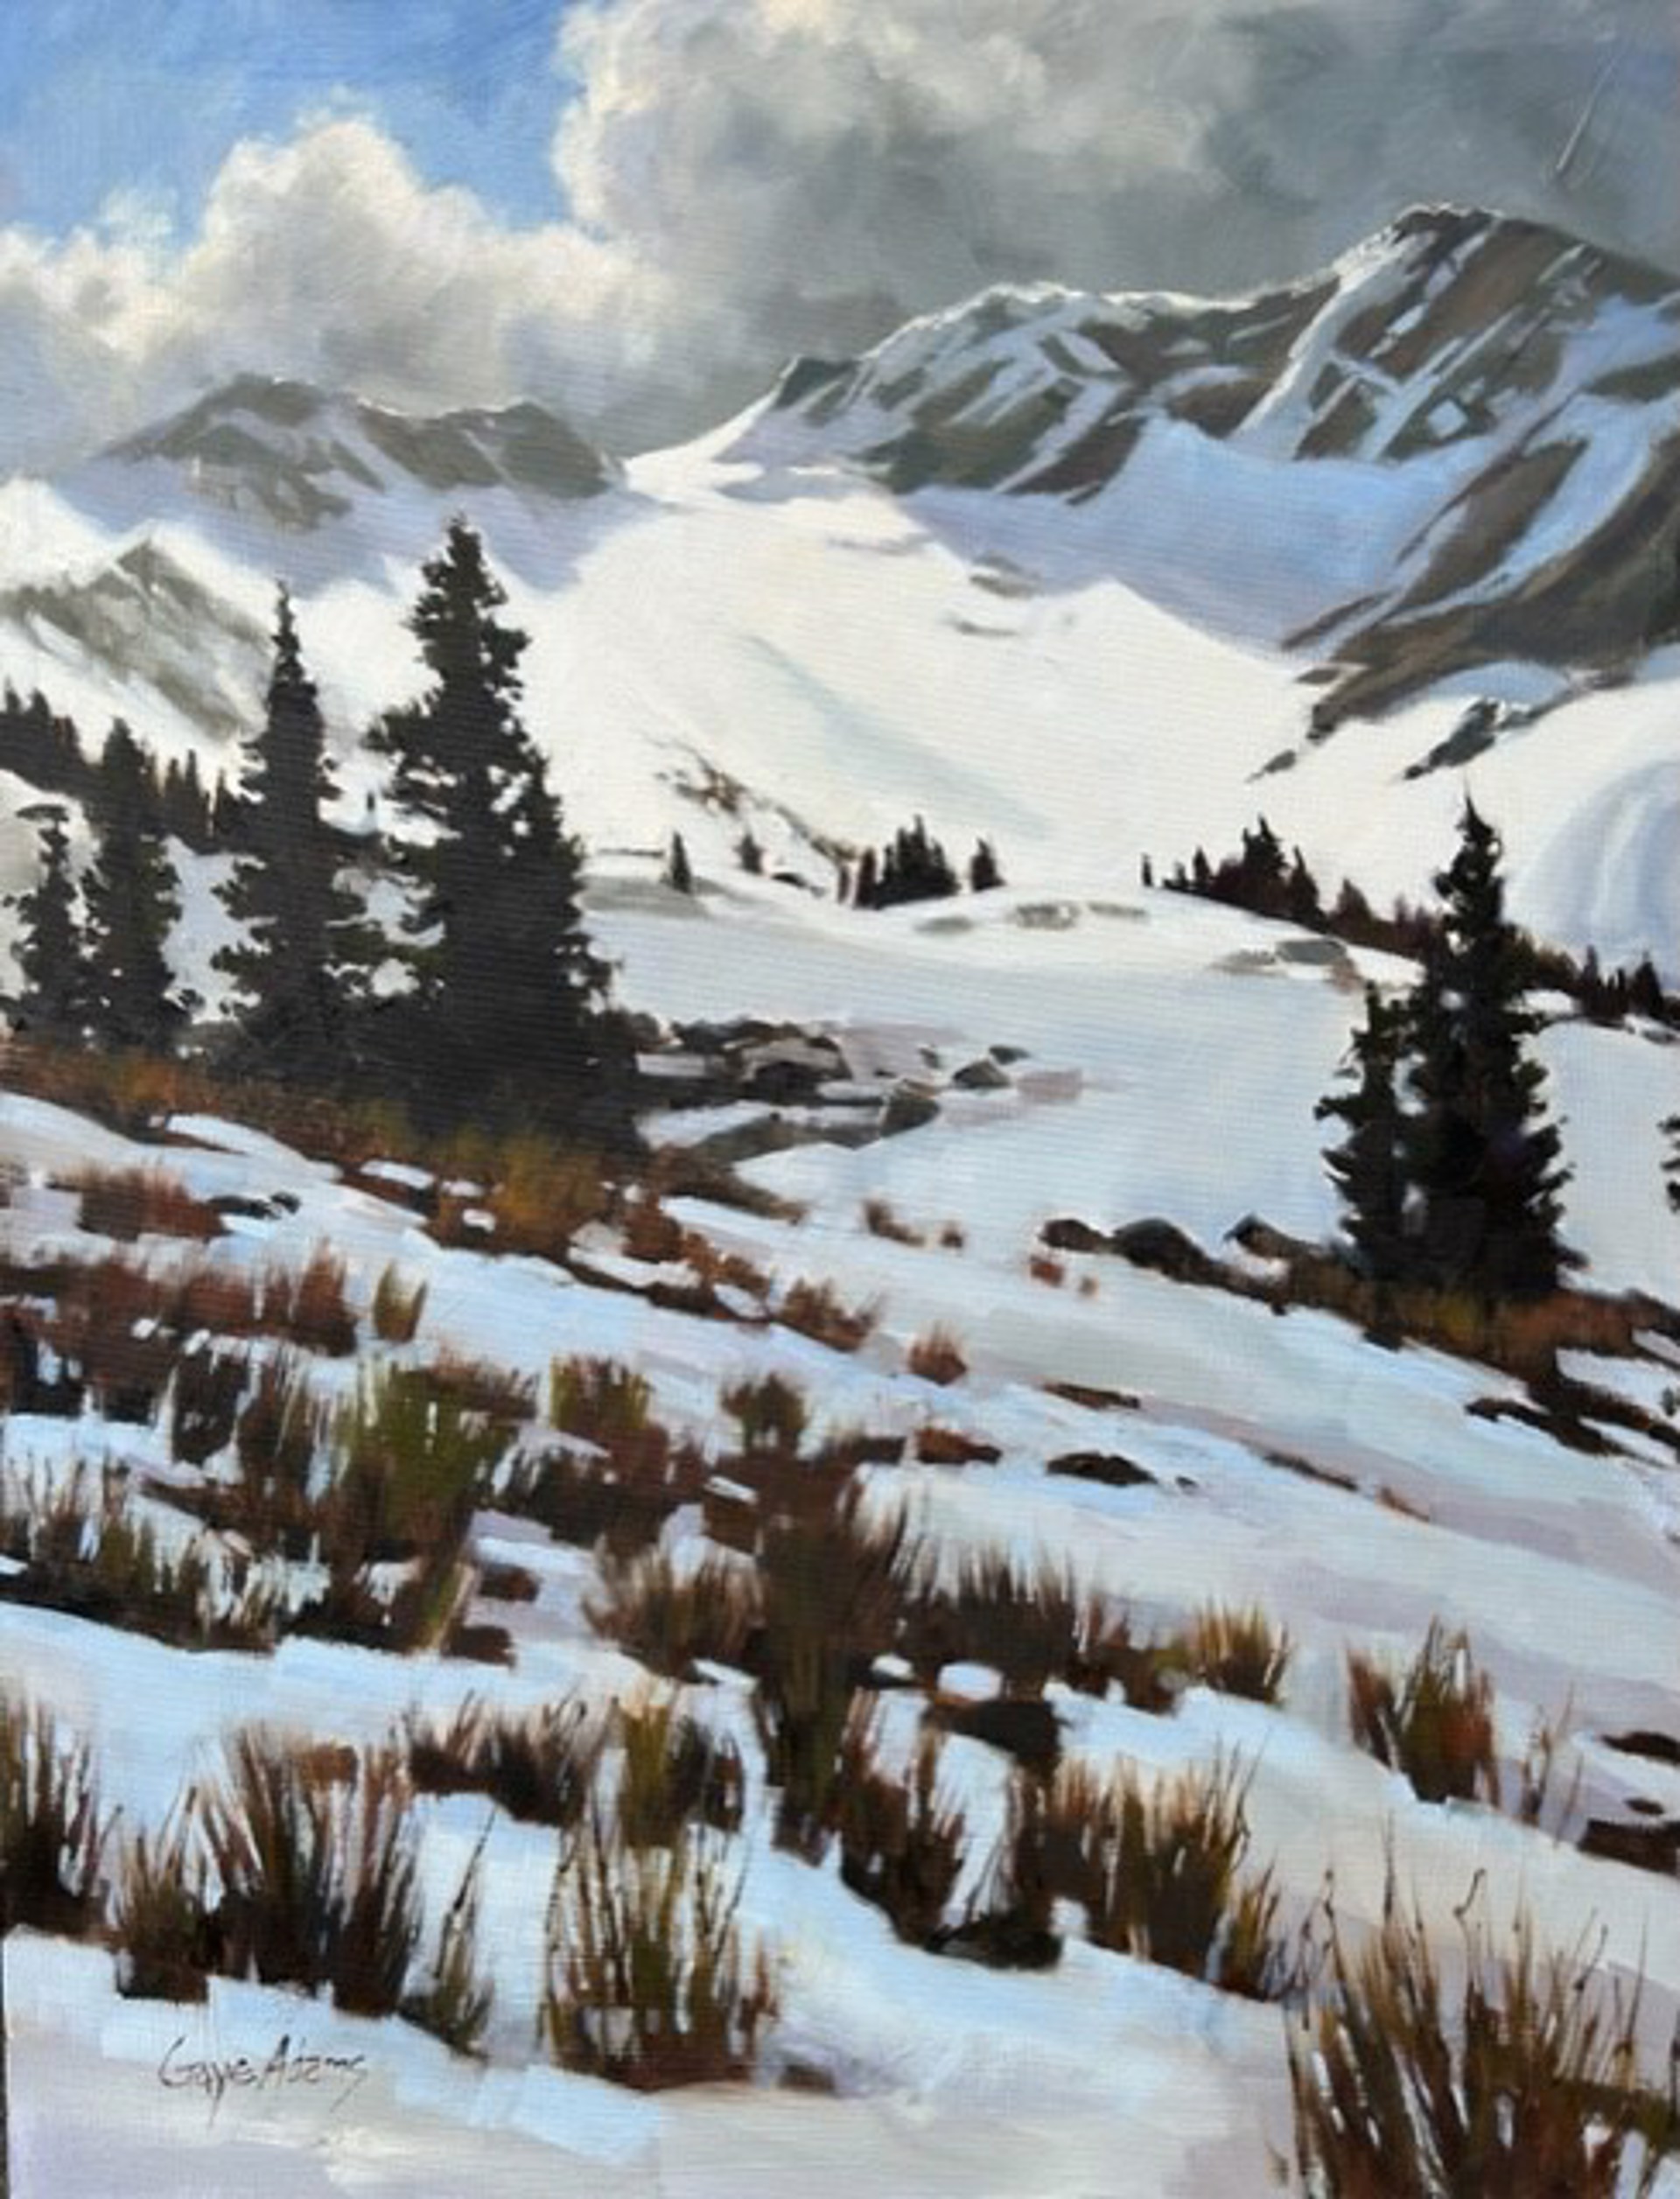 Afternoon Light on Whistler Bowl by GAYE ADAMS